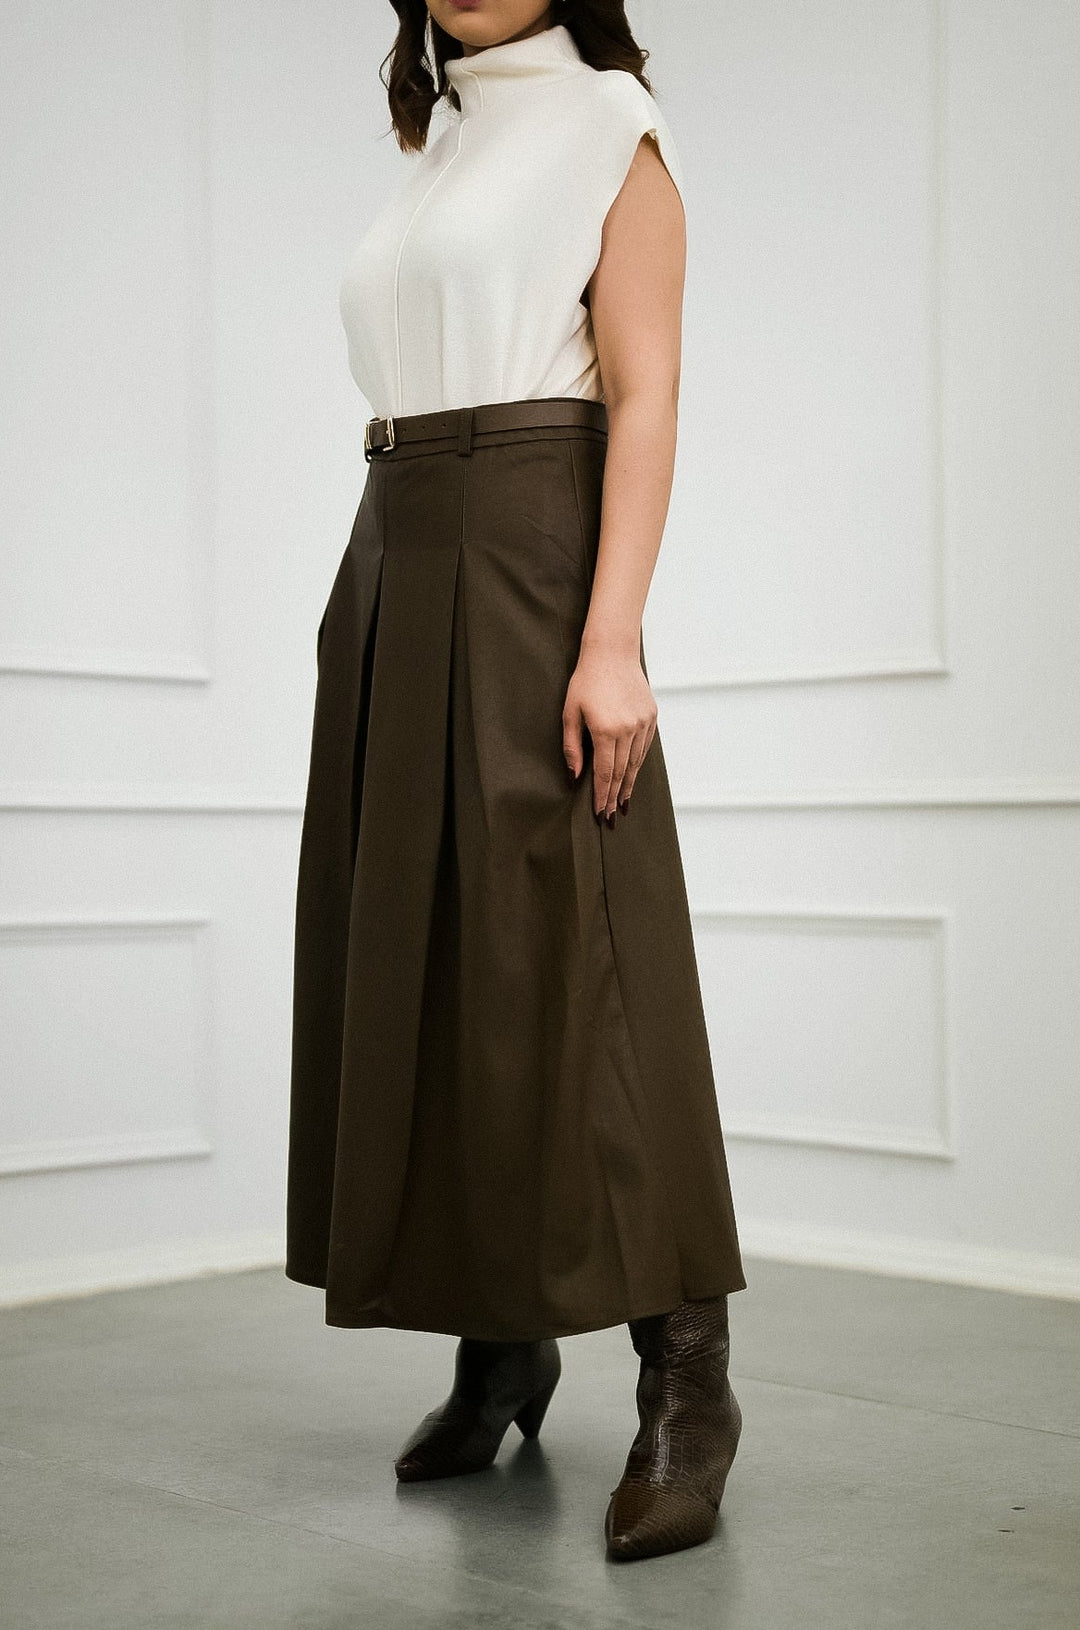 Chic Wardrobe Essential  Box Pleated Faux Leather Skirt with Stylish Belt